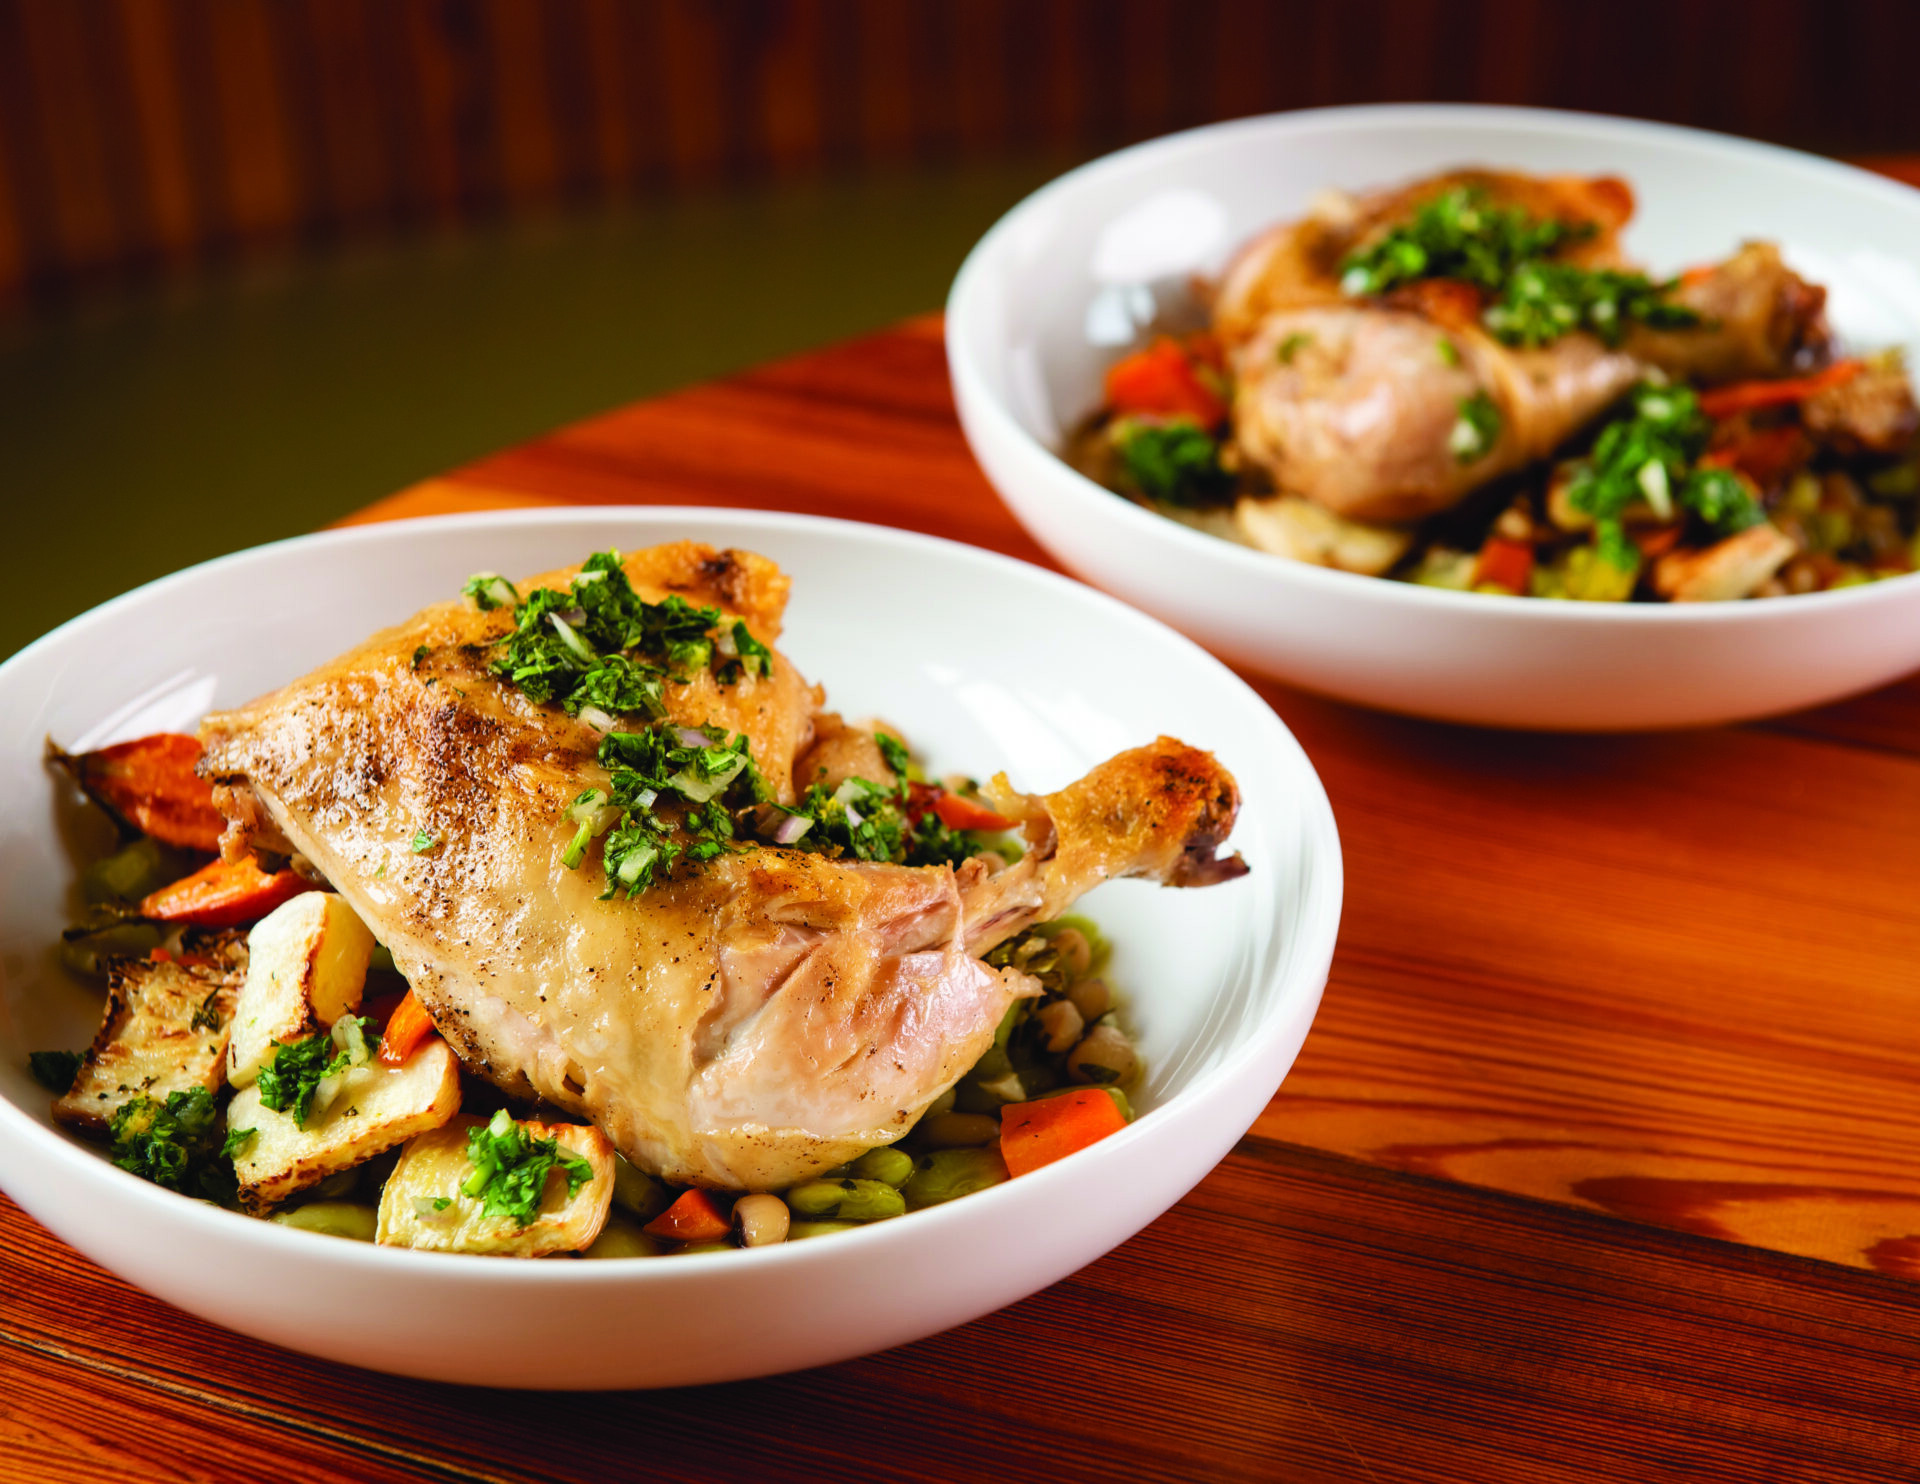 The chicken cassoulet in shallow bowls